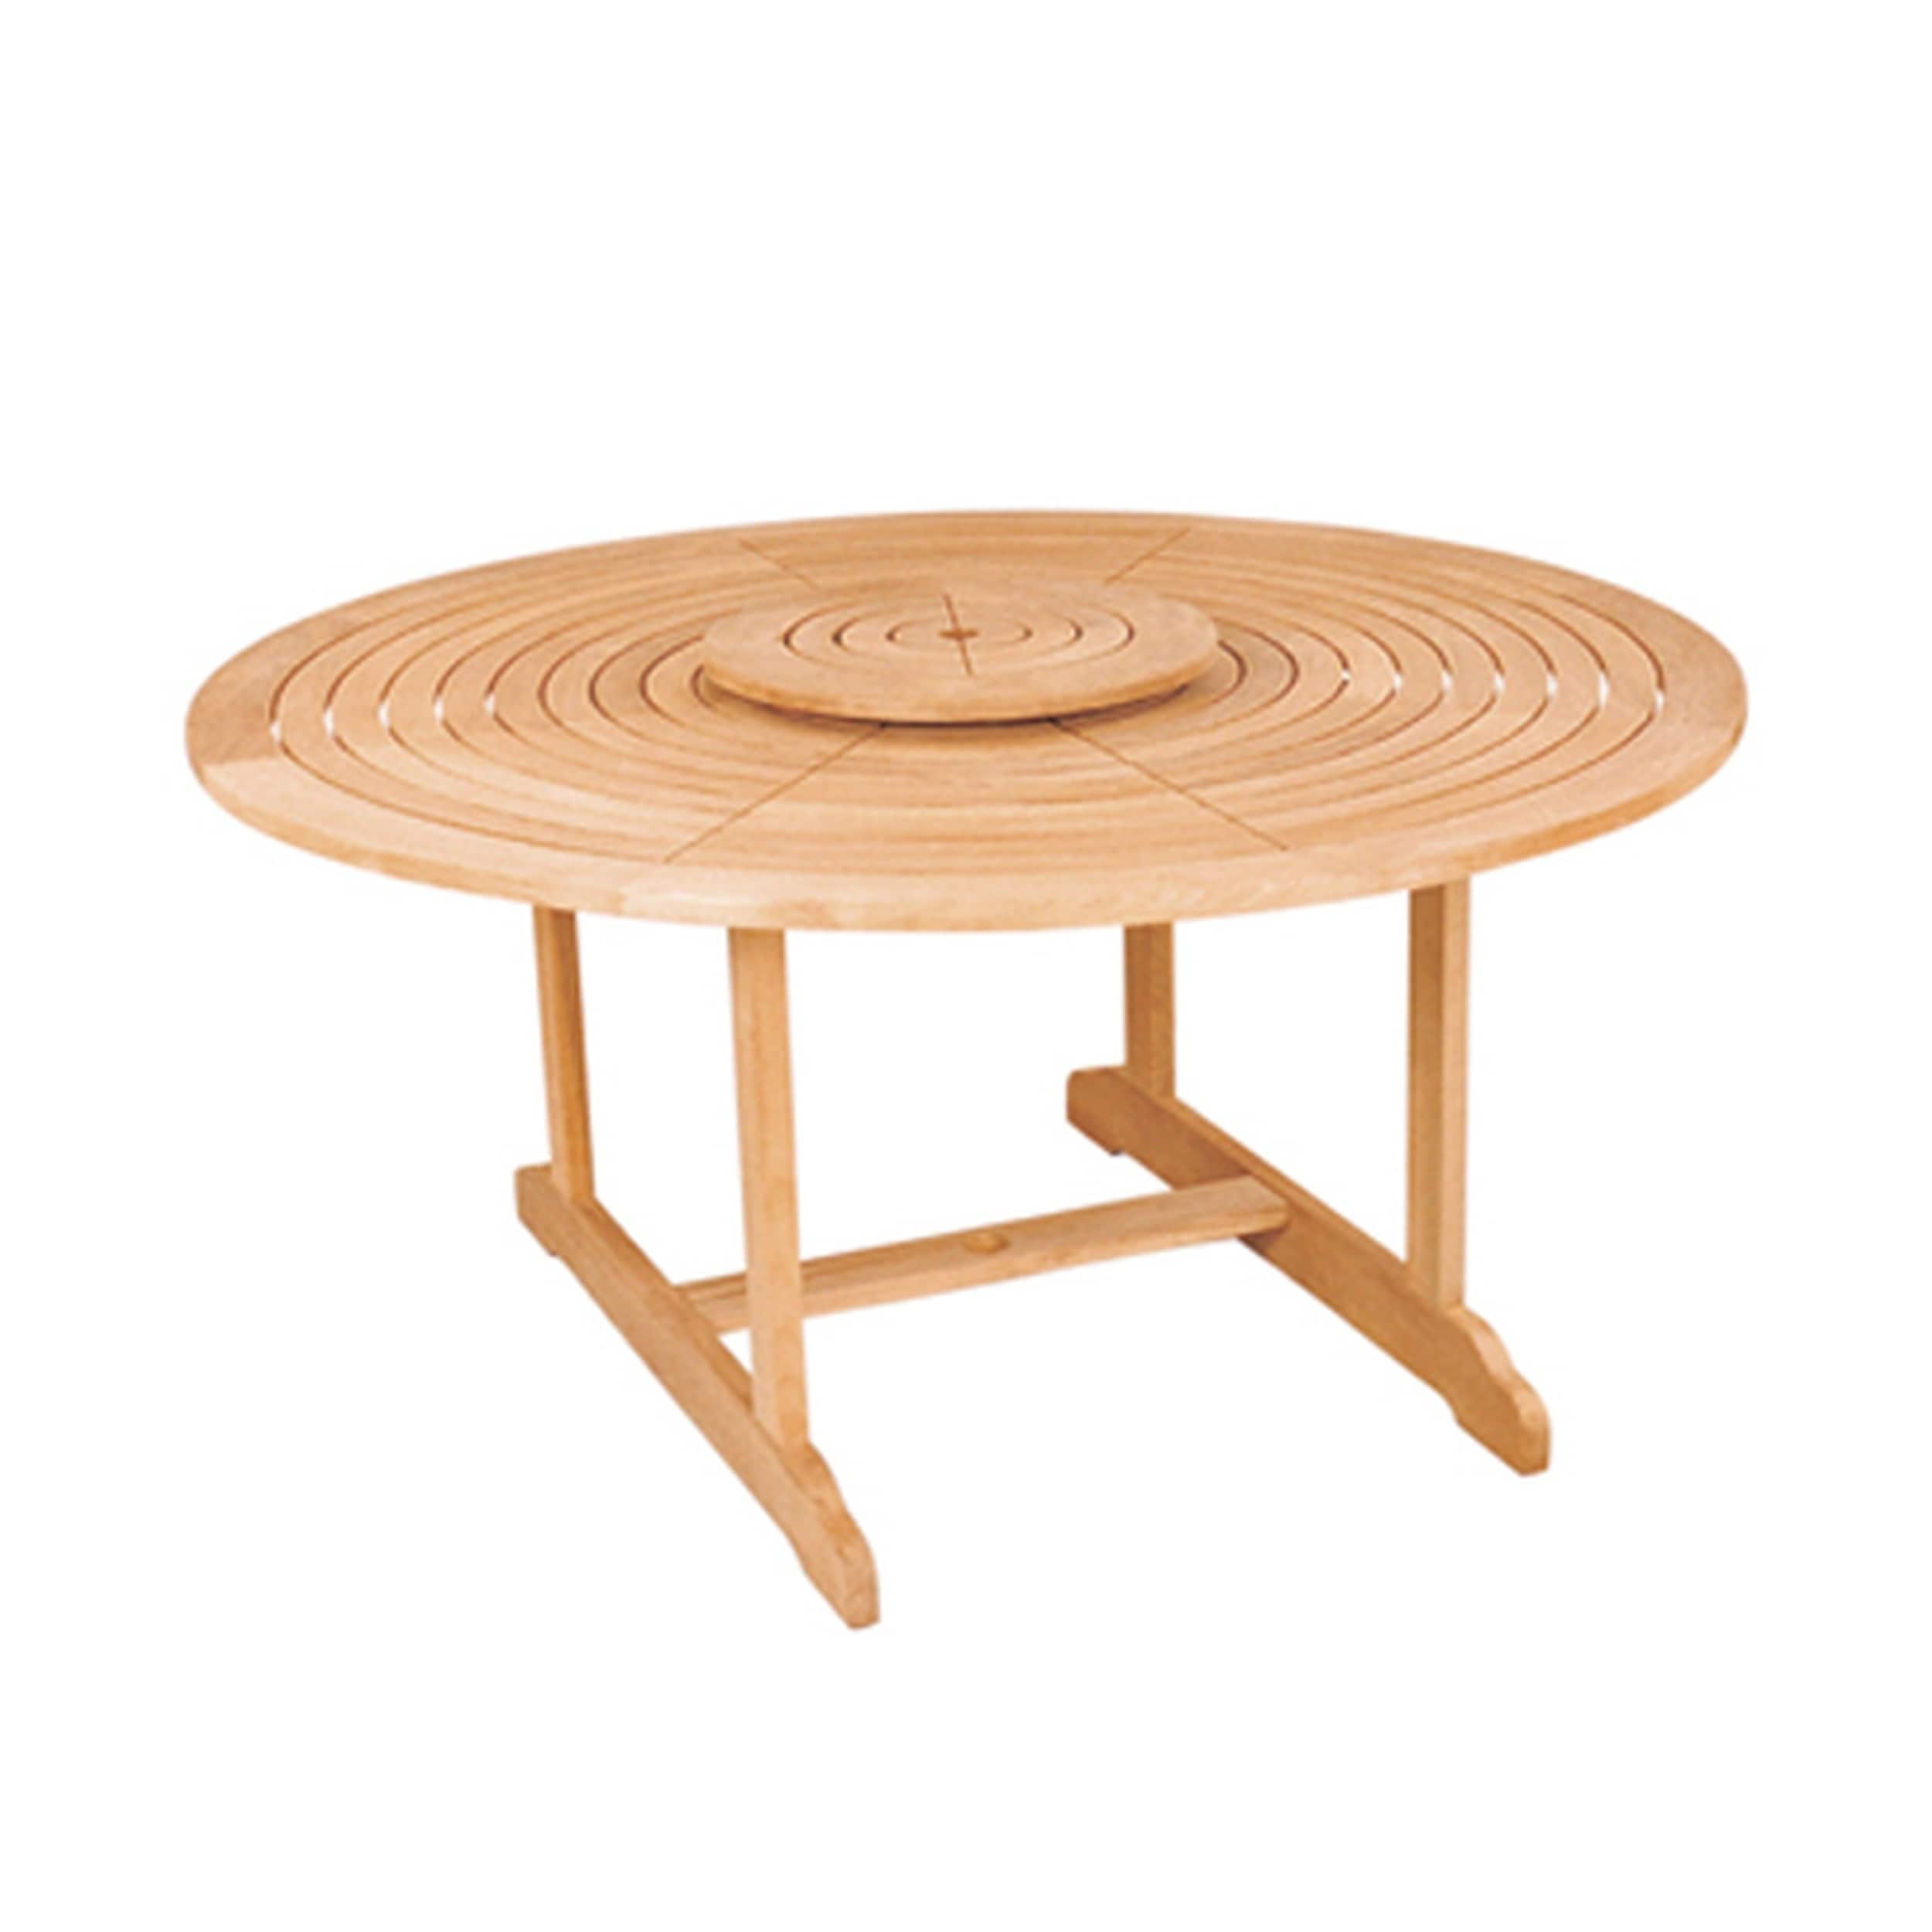 HiTeak Furniture Royal 59" Round Teak Wooden Patio Dining Table with Lazy Susan - image 2 of 3